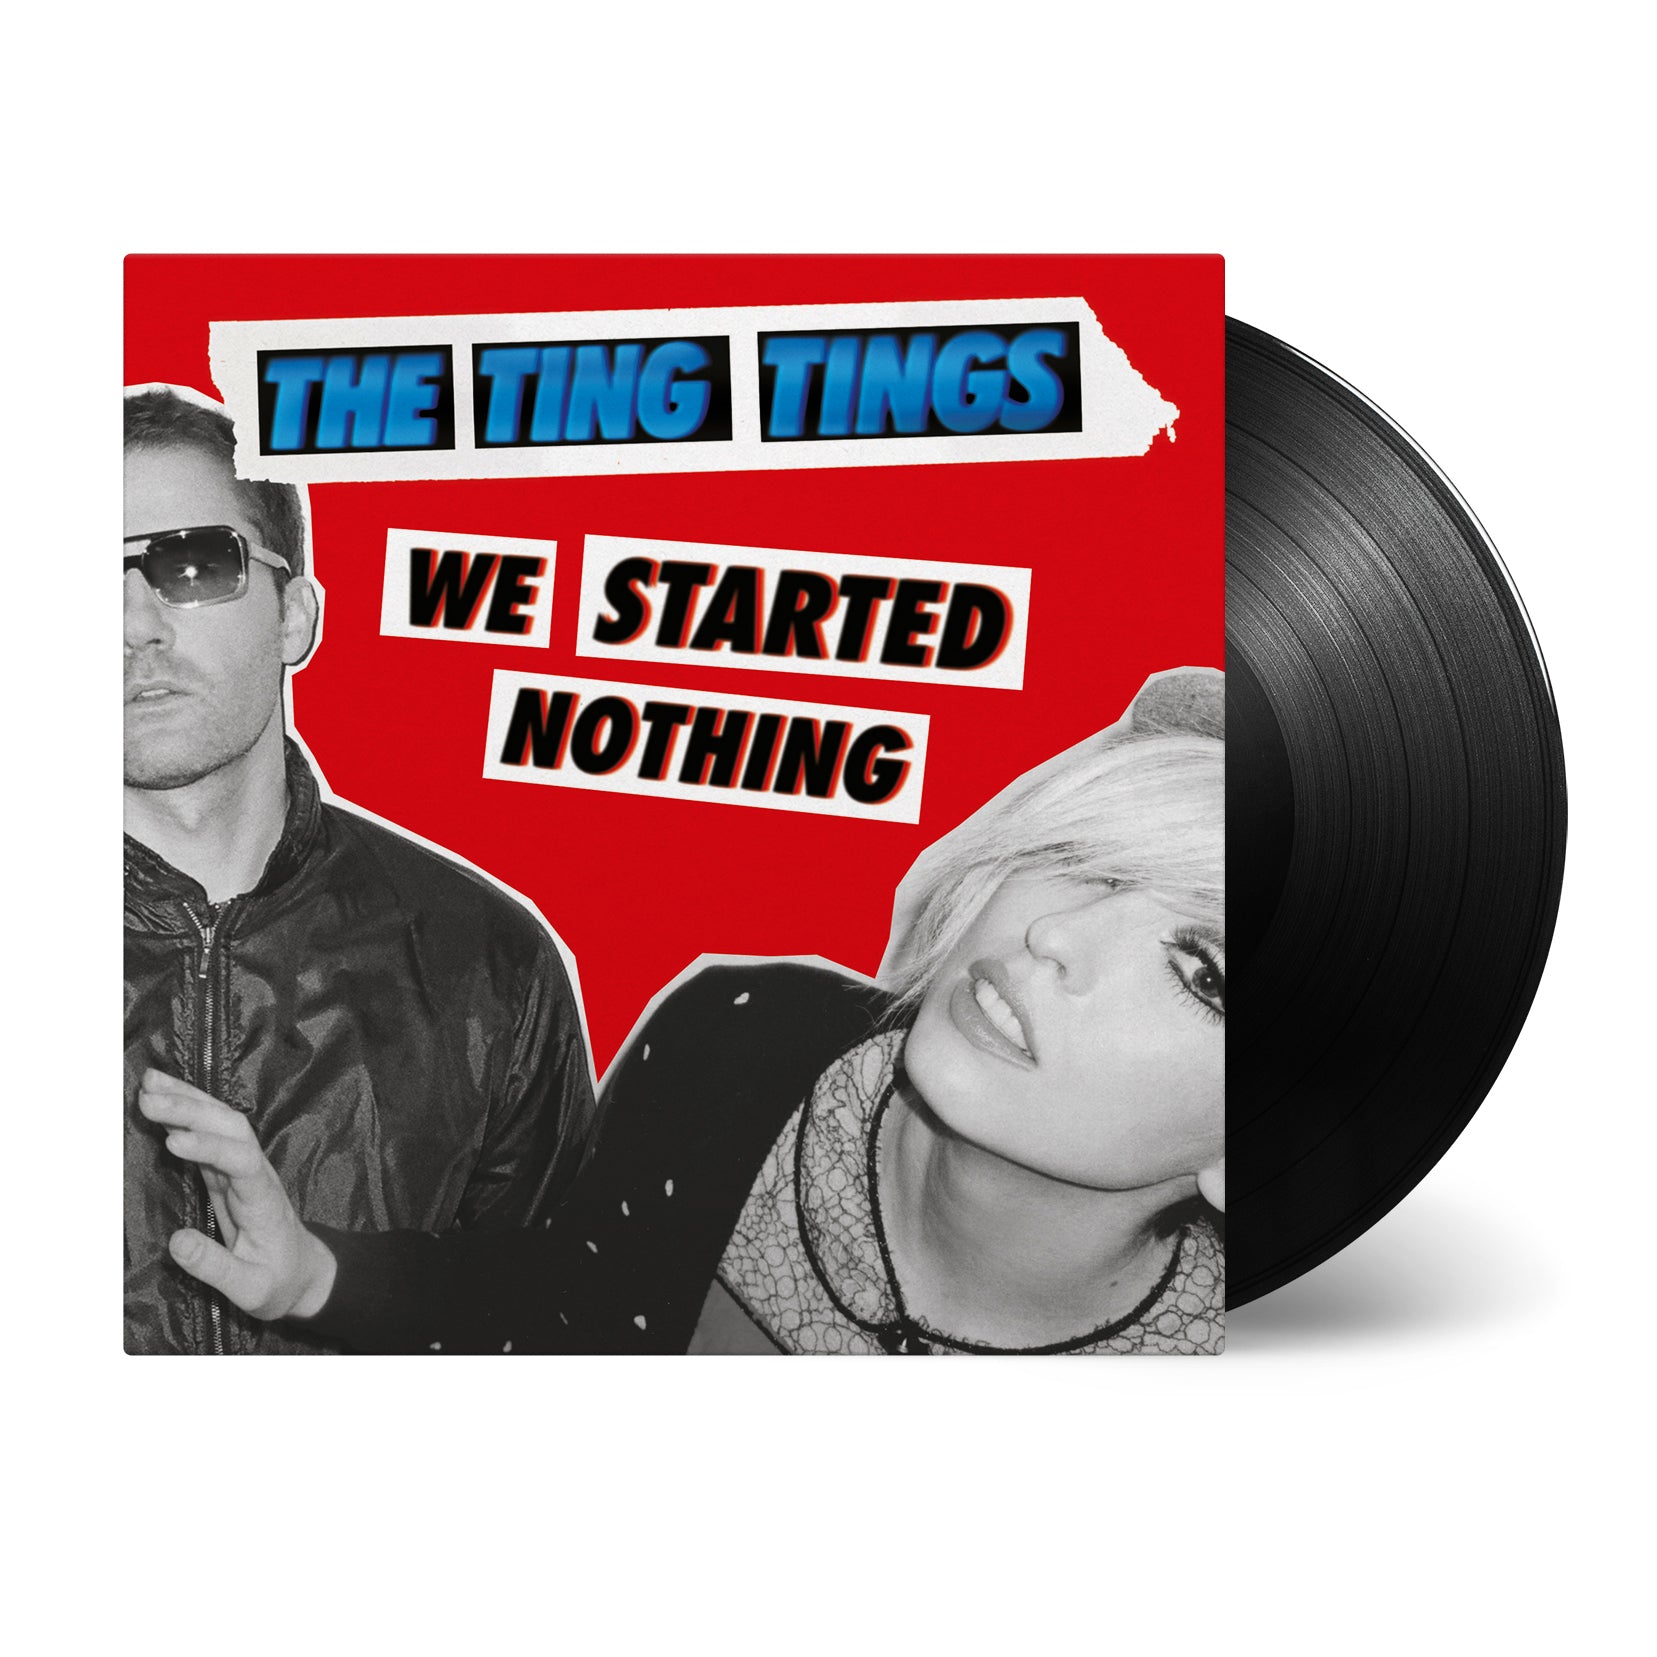 The Ting Tings - We Started Nothing: Vinyl LP